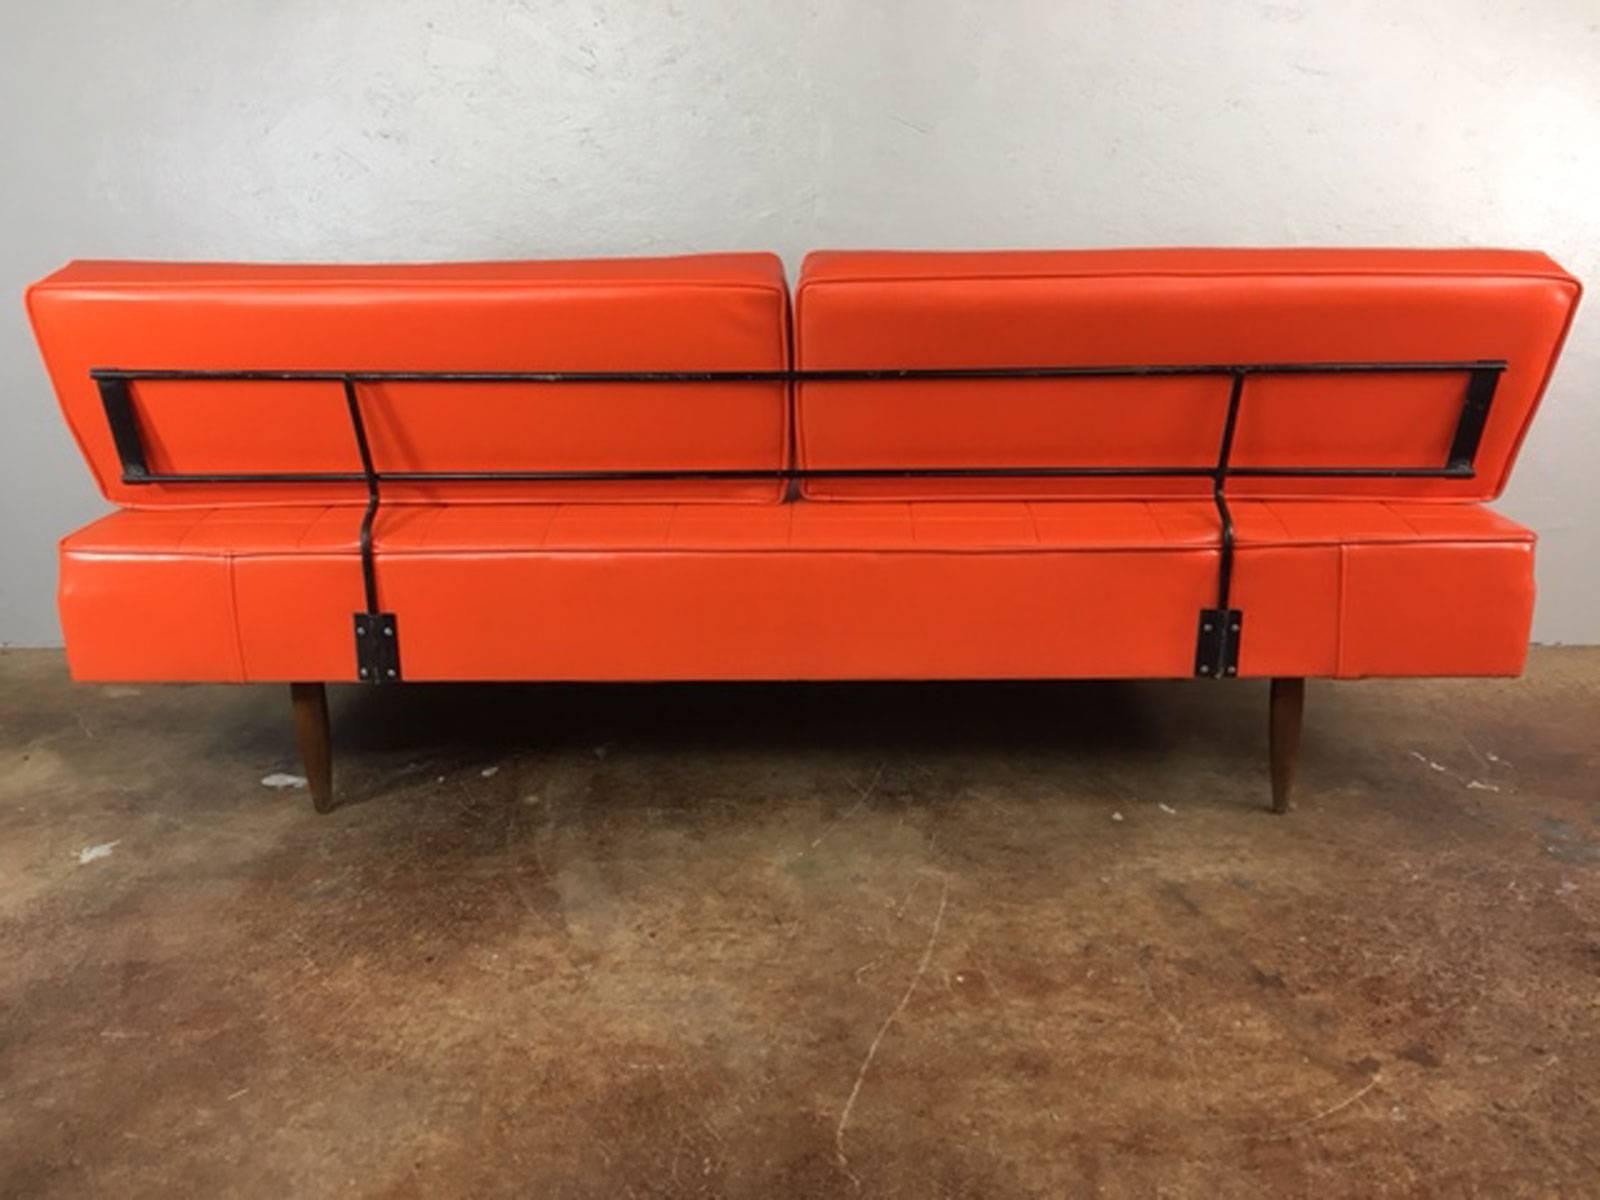 Superior and functional Mid-Century Modern daybed in original bright orange Naugahyde with wood frame, legs, and metal accents. No rips, tears, holes, or unusual wear. U.S. maker. circa 1960s. Solid. sturdy.